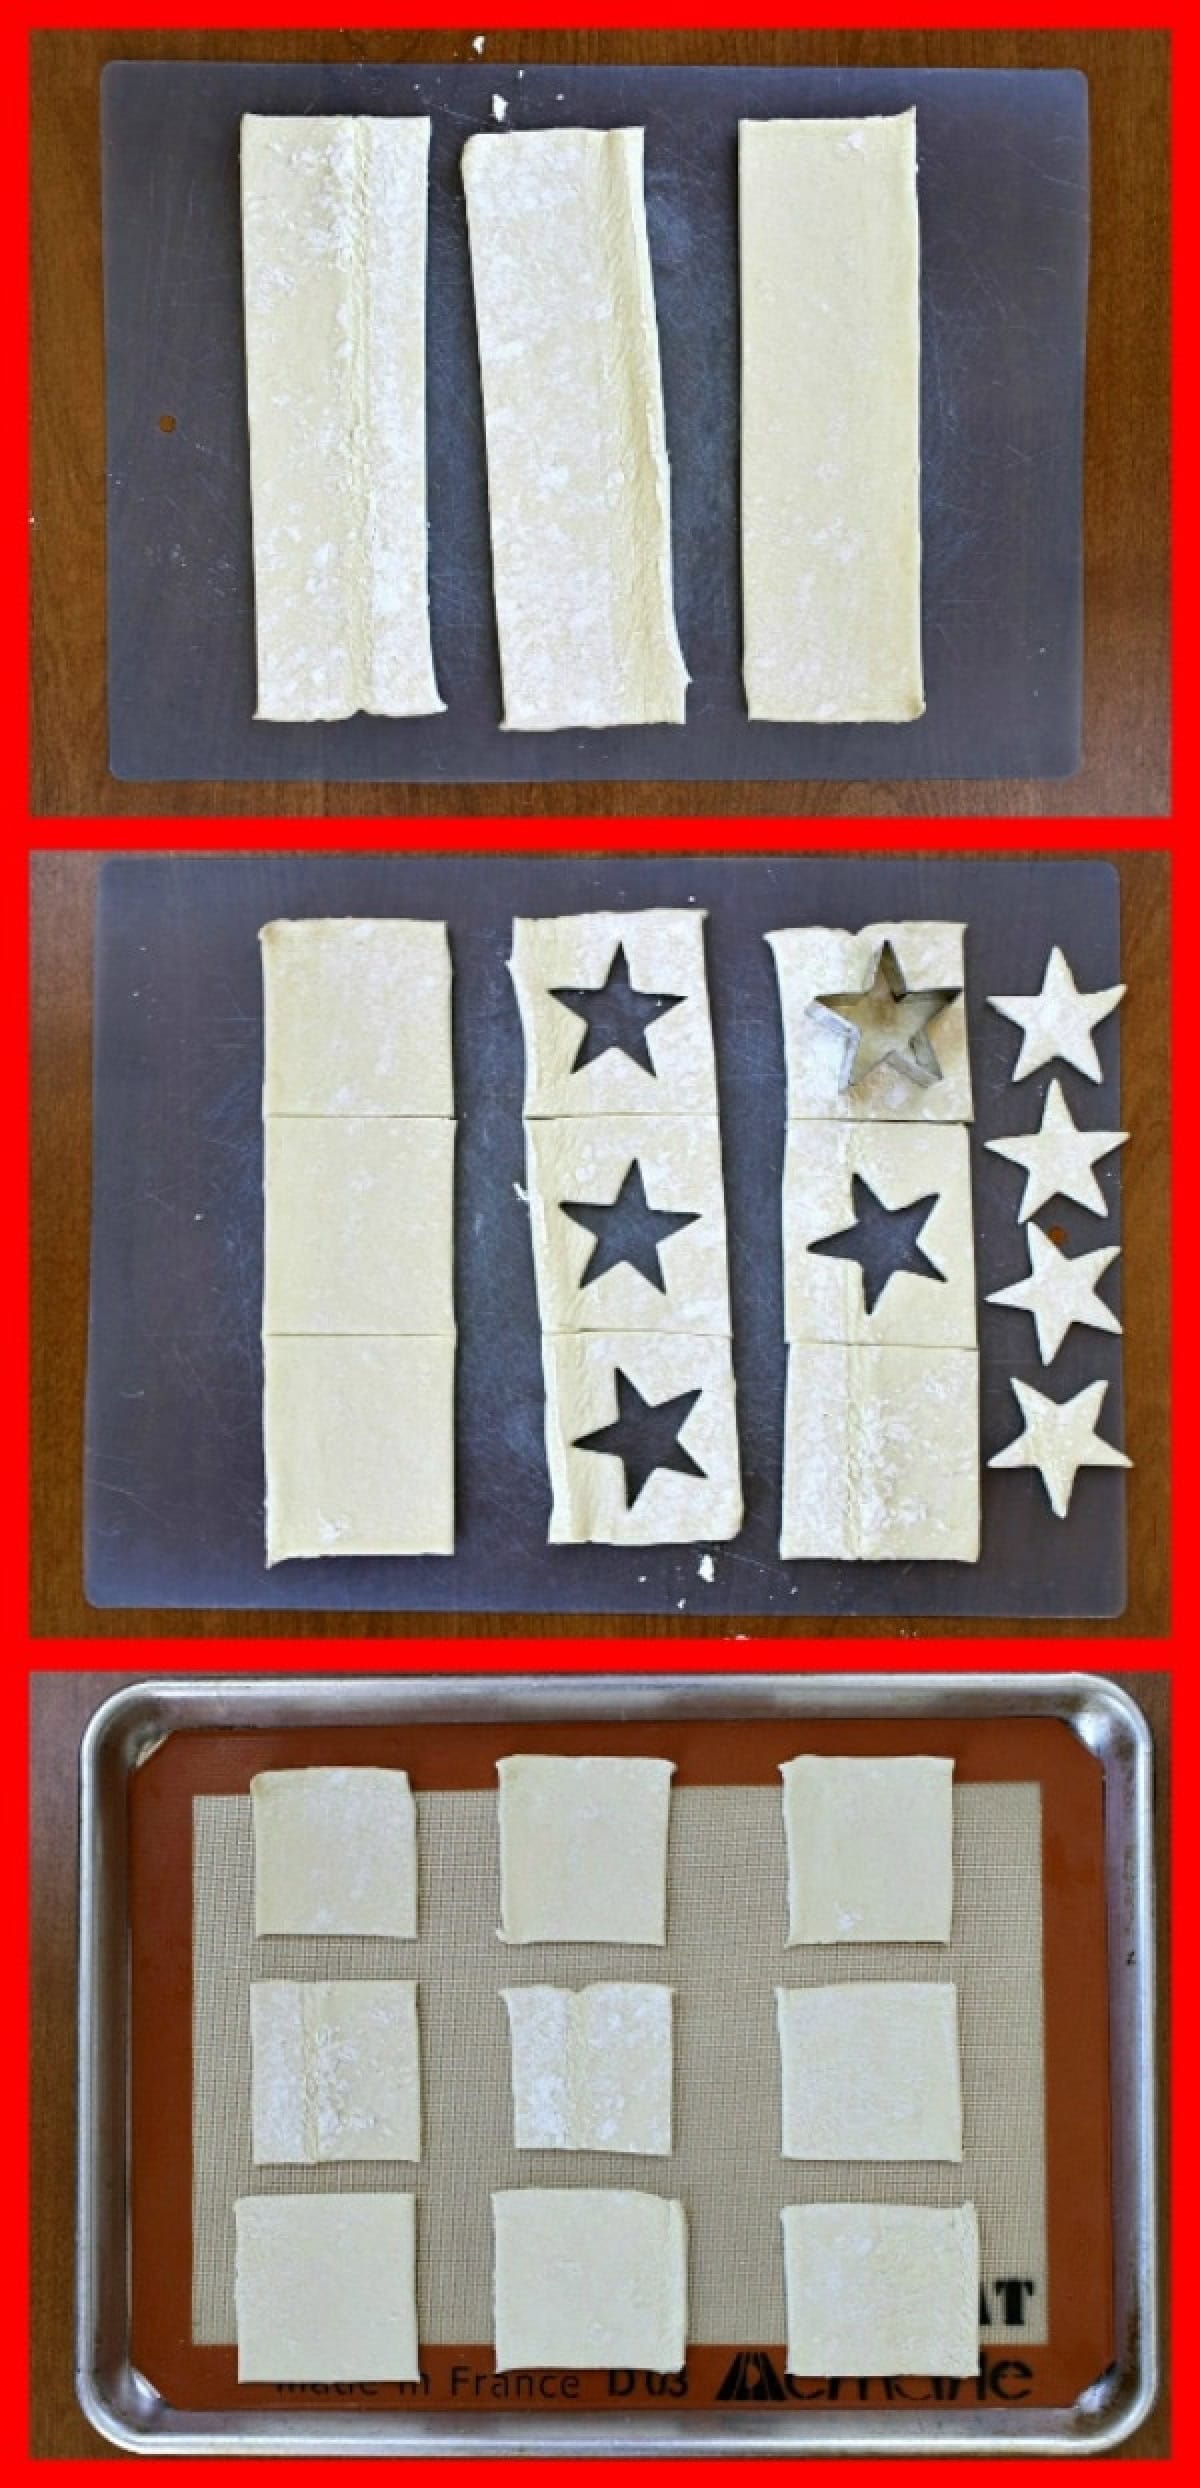 three photos showing how to cute out stars from puff pastry